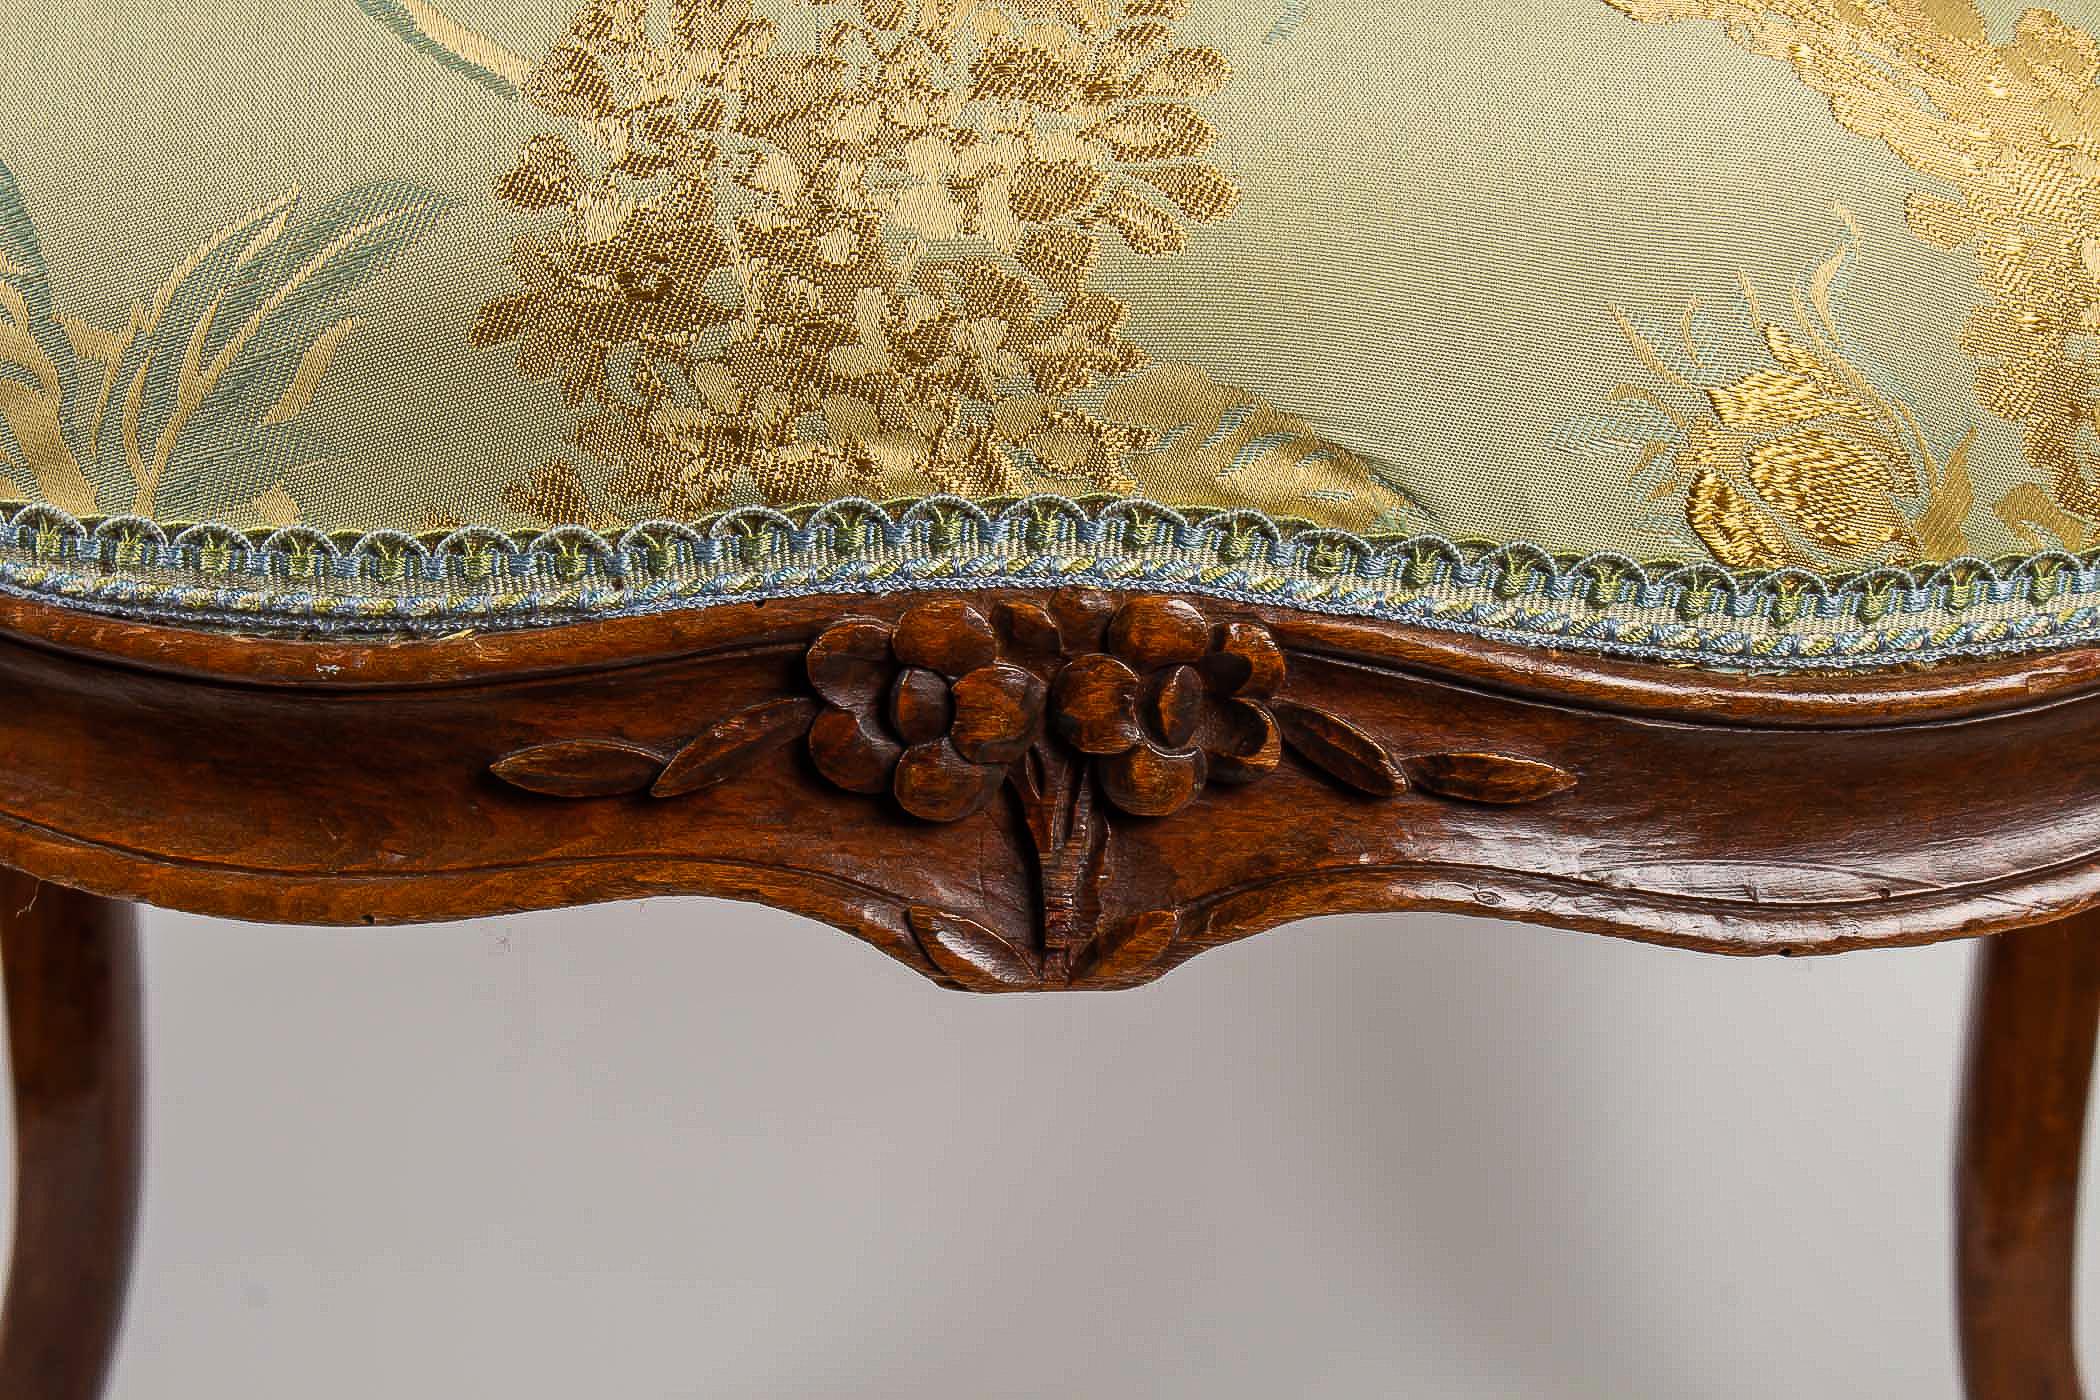 Fruitwood Louis XV Period Set of 4 of Large Armchairs, circa 1766-1770 by Louis Delanois